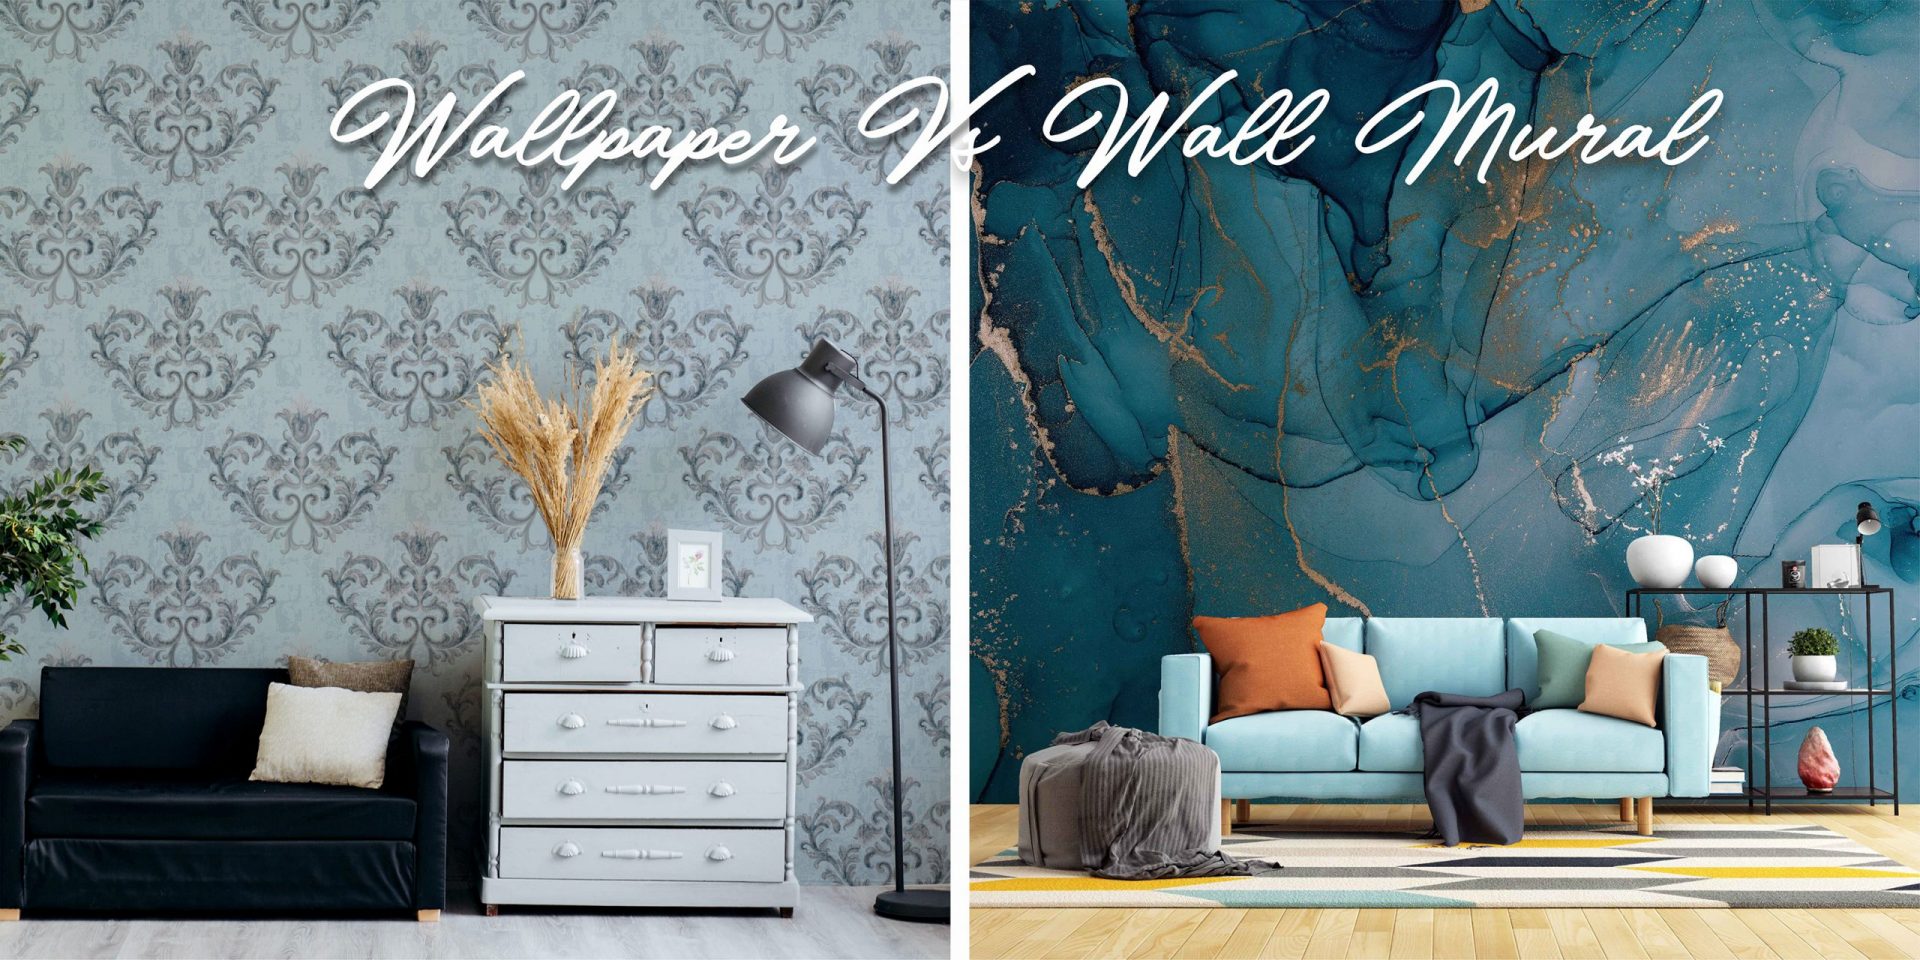 Wallpaper Vs Wall Mural: Which Is Better?